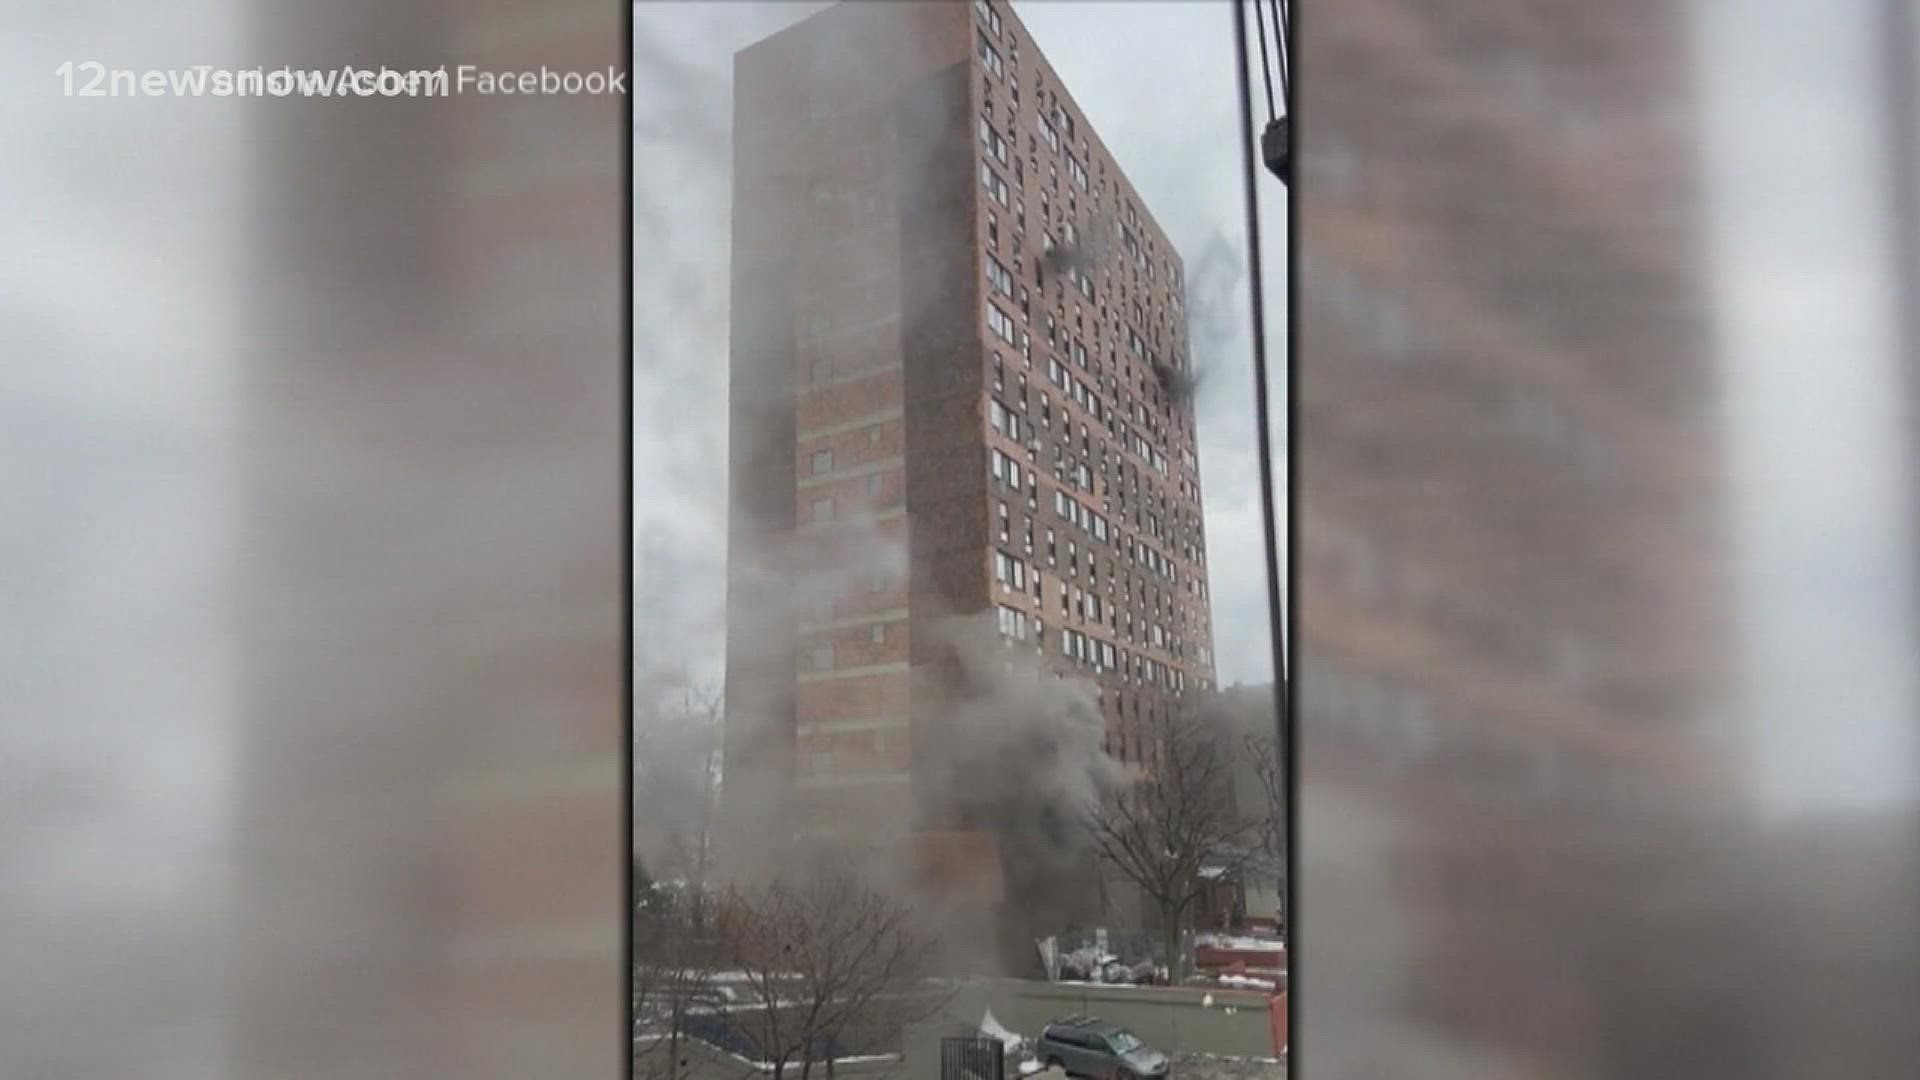 The fire broke out on the third floor of a 19 story high rise.